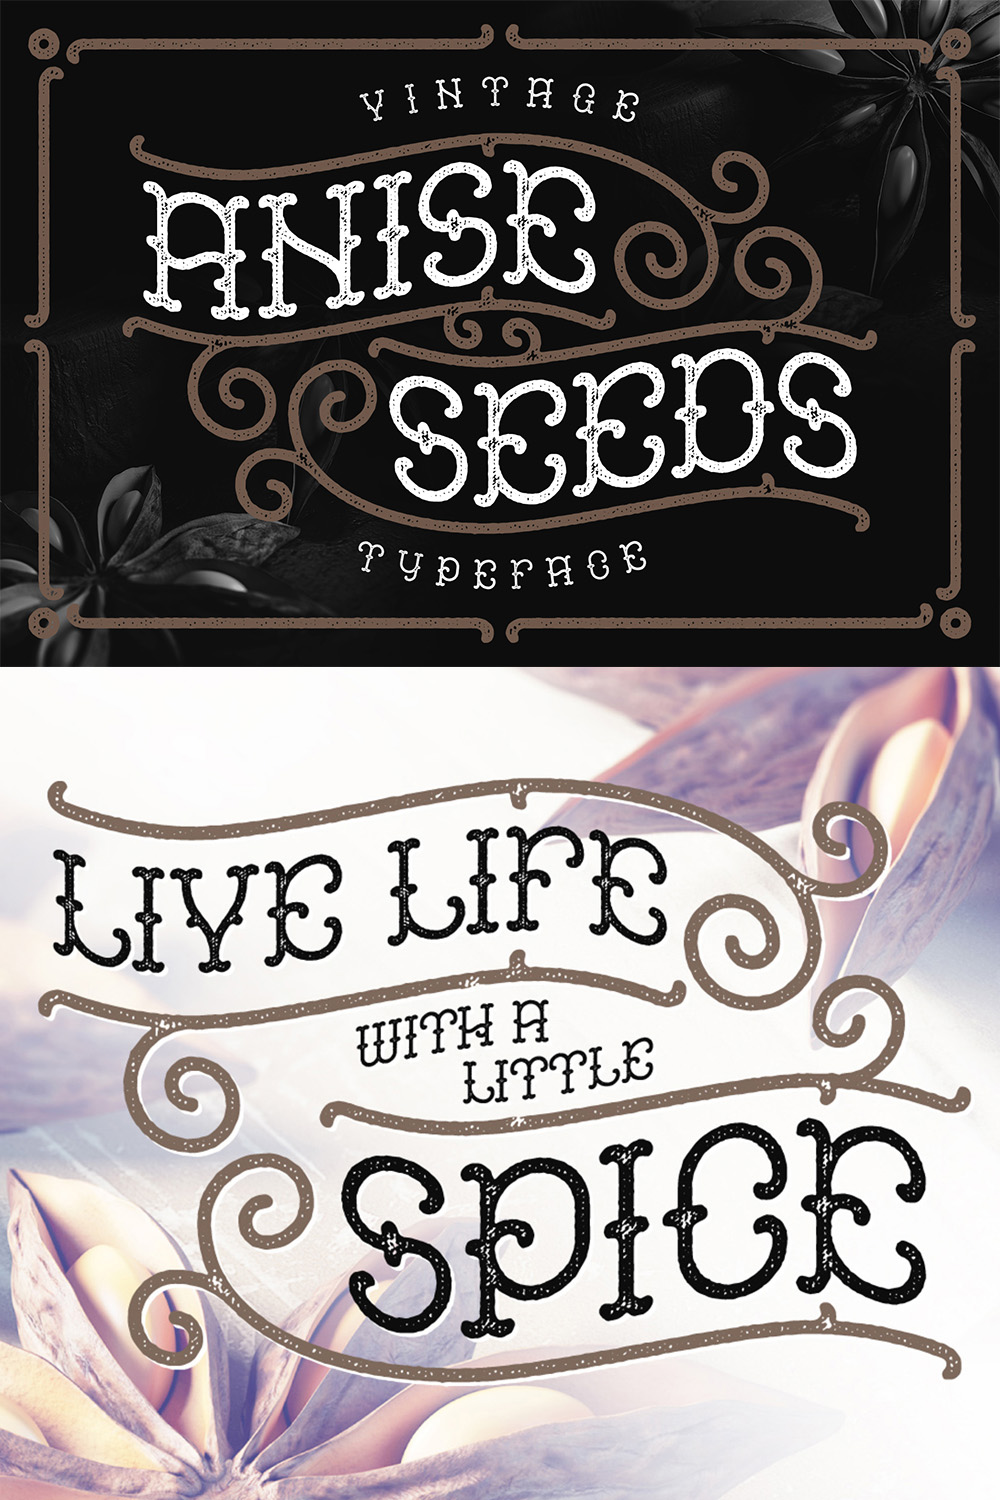 Anise Seeds Typeface Pinterest collage image.